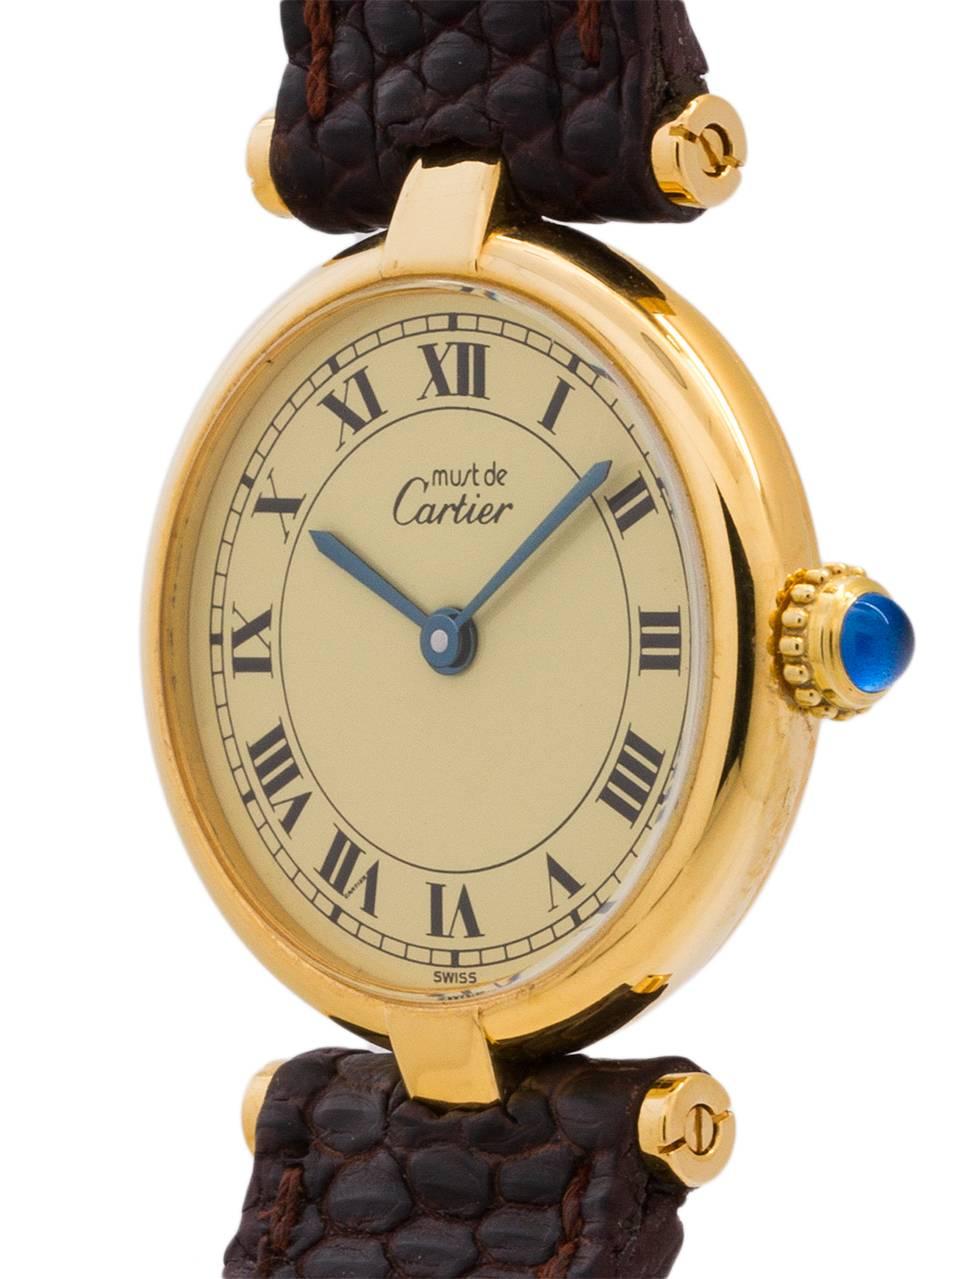 
Cartier Lady’s vermeil Vendome Tank Must de Cartier circa 1990s. Featuring a 24.5 x 30mm round case with “T bar” lugs and sapphire crystal. Classic cream dial with black roman numerals, blue steeled hands, and blue cabachon sapphire crown. Battery